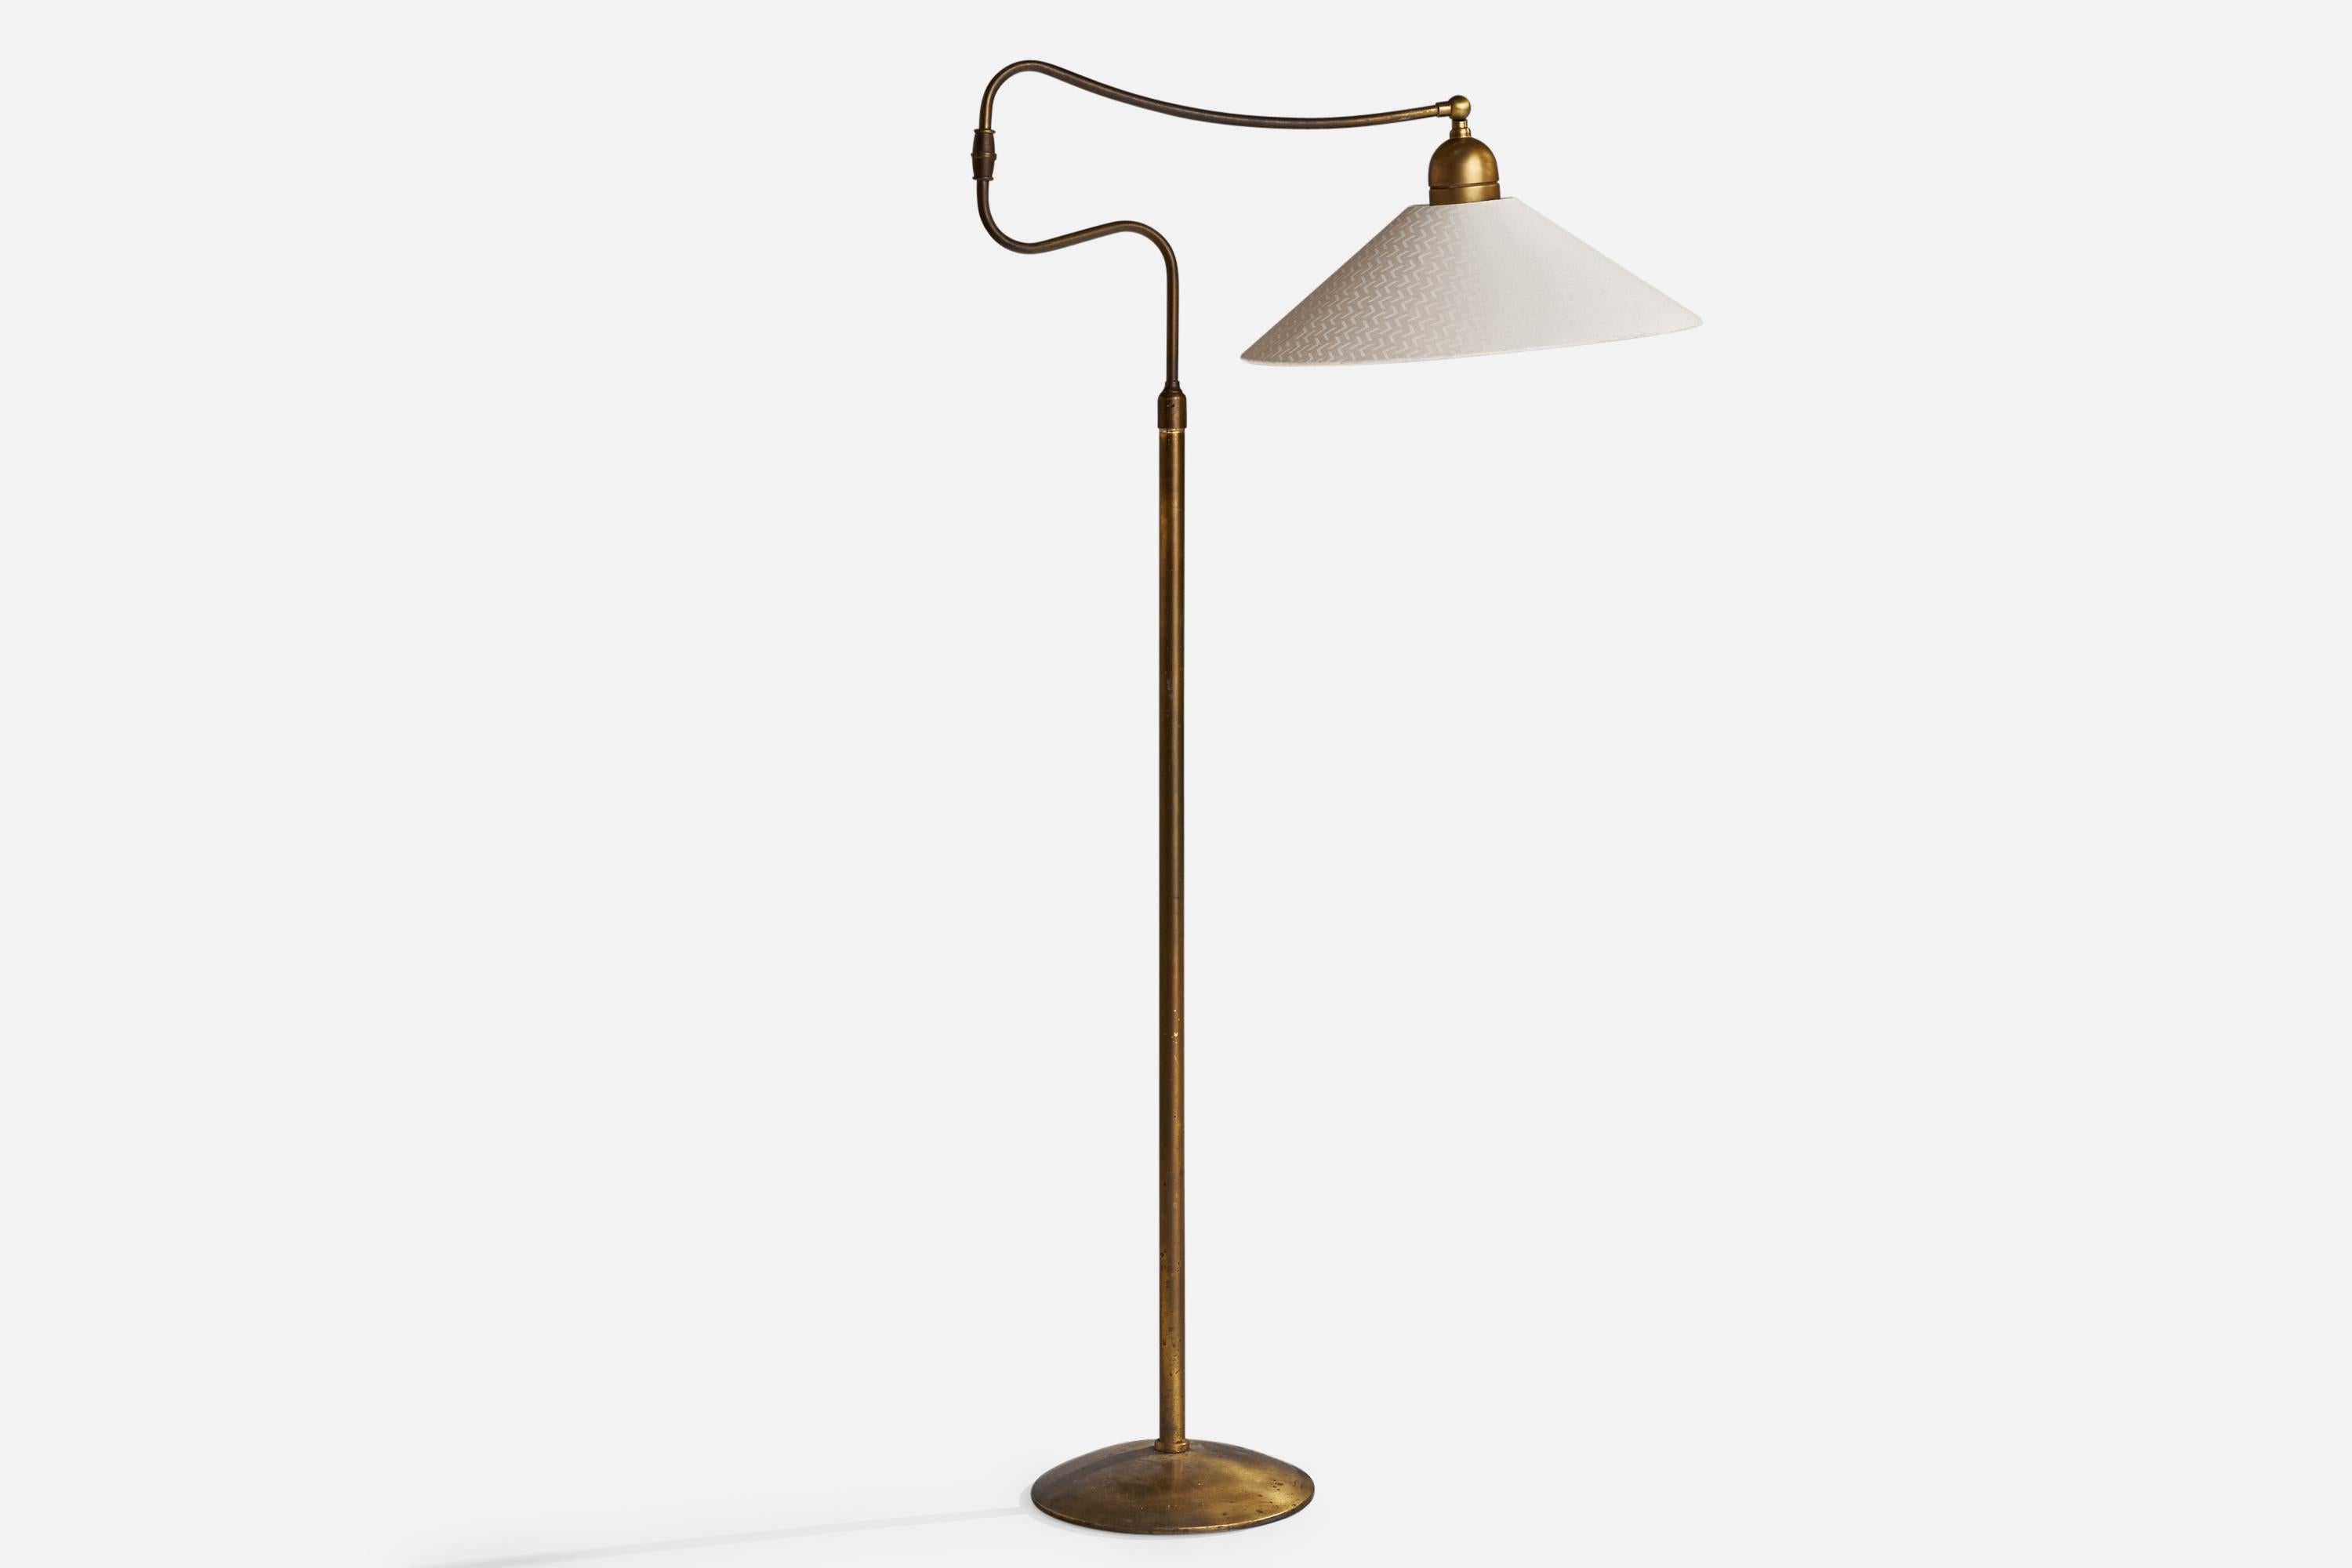 An adjustable brass and off-white fabric floor lamp designed and produced in Italy, c. 1950s.

Overall Dimensions (inches): 63.25” H x 33”W x 9” D
Stated dimensions include shade.
Bulb Specifications: E-26 Bulb
Number of Sockets: 1
All lighting will